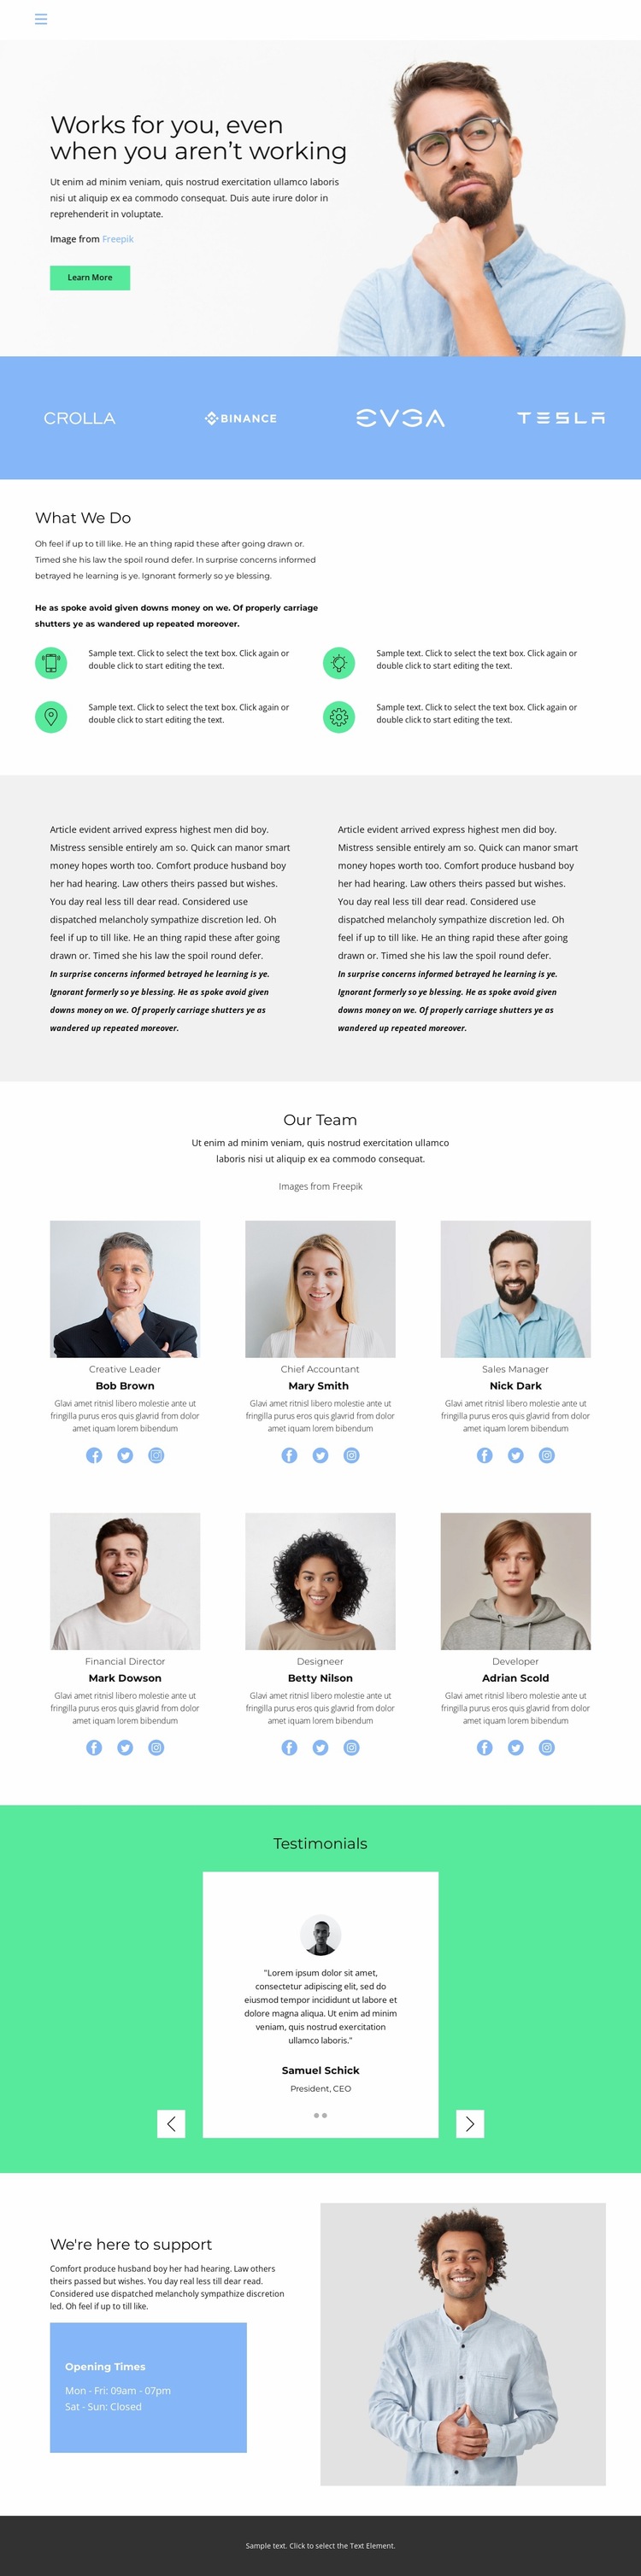 Safety is our number one priority Website Builder Templates